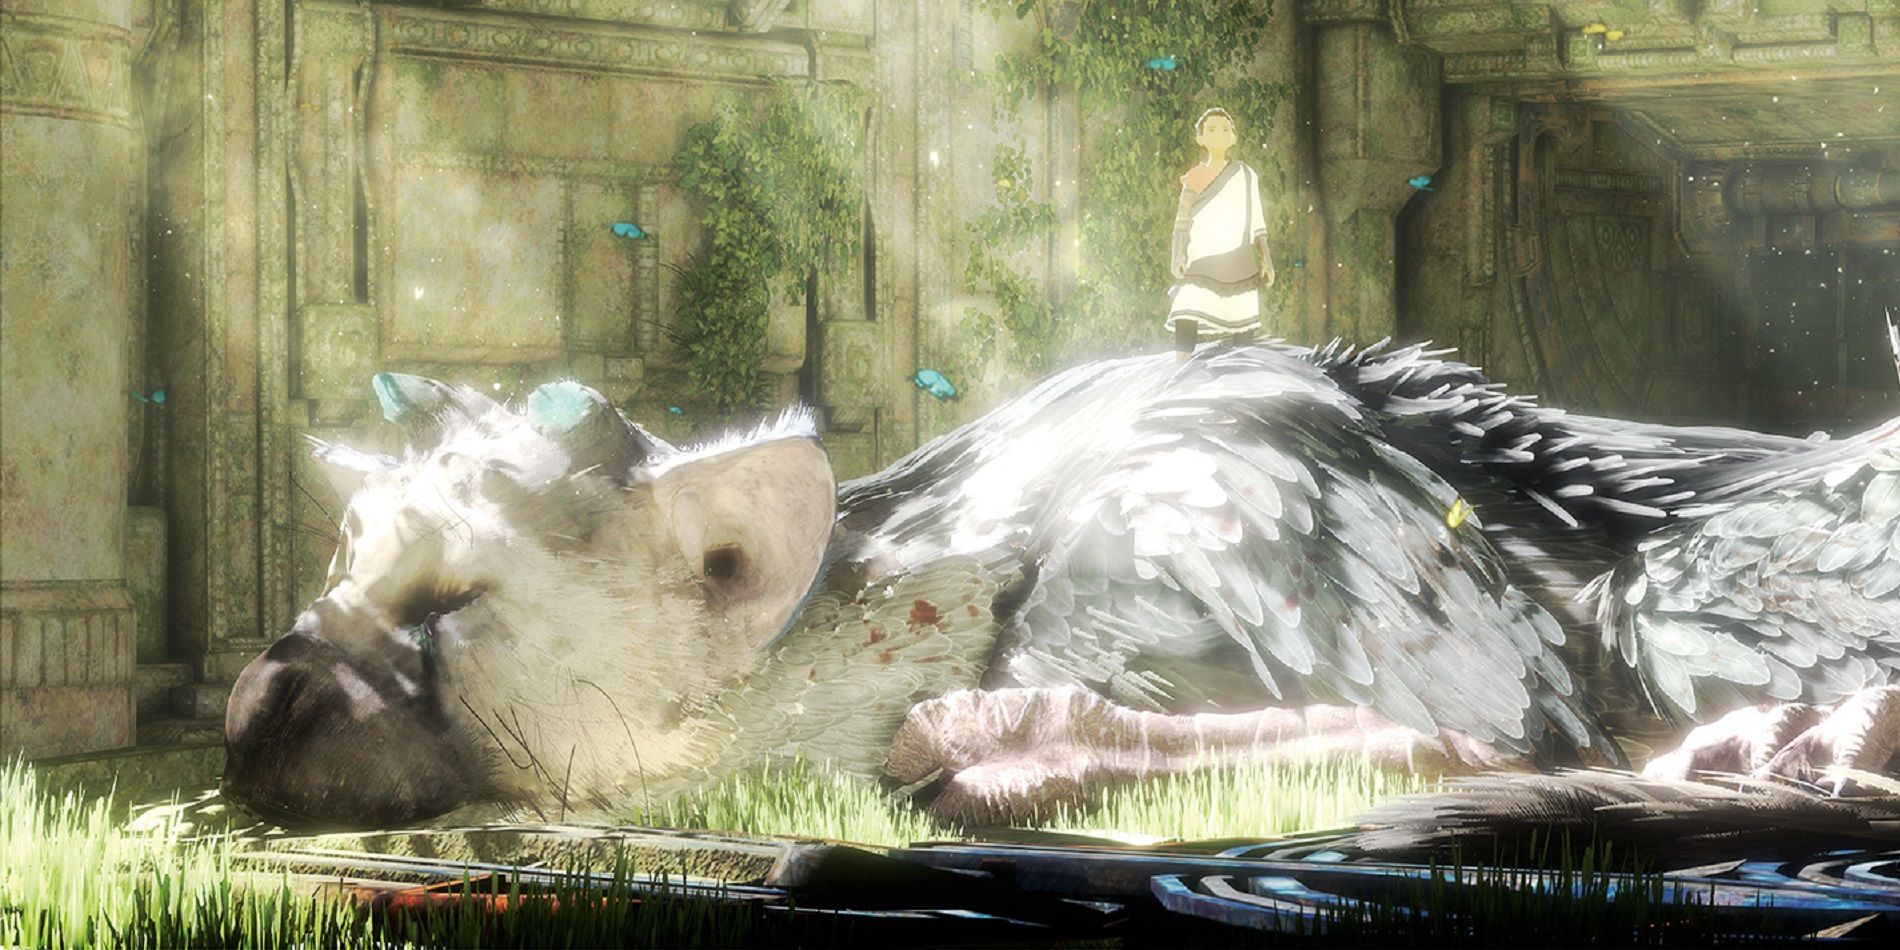 “The Last Guardian” Delayed - Now Slated for December 2016